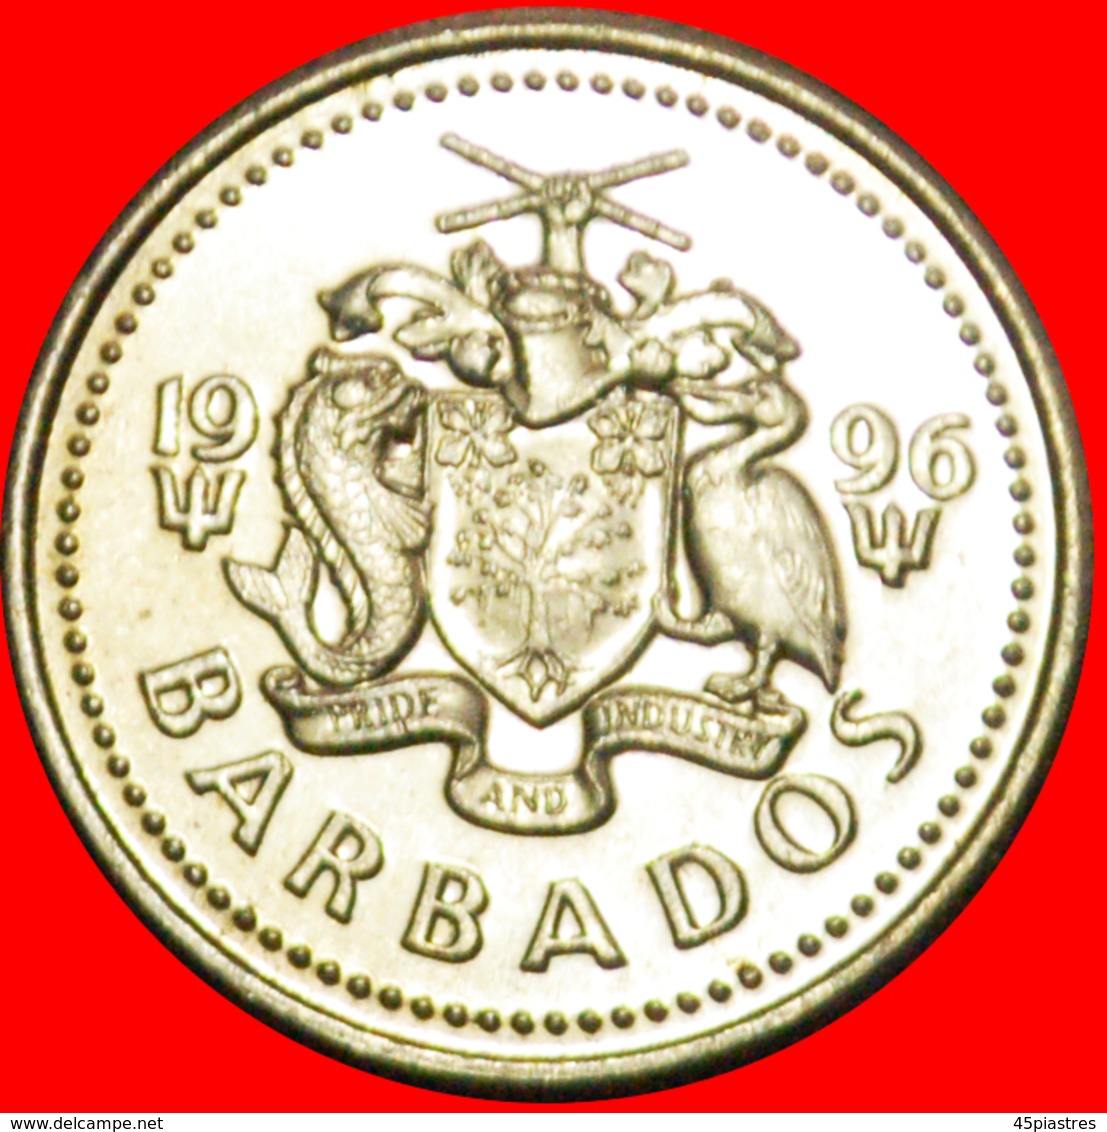 + GREAT BRITAIN (1973-2005): BARBADOS ★ 10 CENTS 1996 MINT LUSTER★DISCOVERY COIN! LOW START ★ NO RESERVE! - Barbados